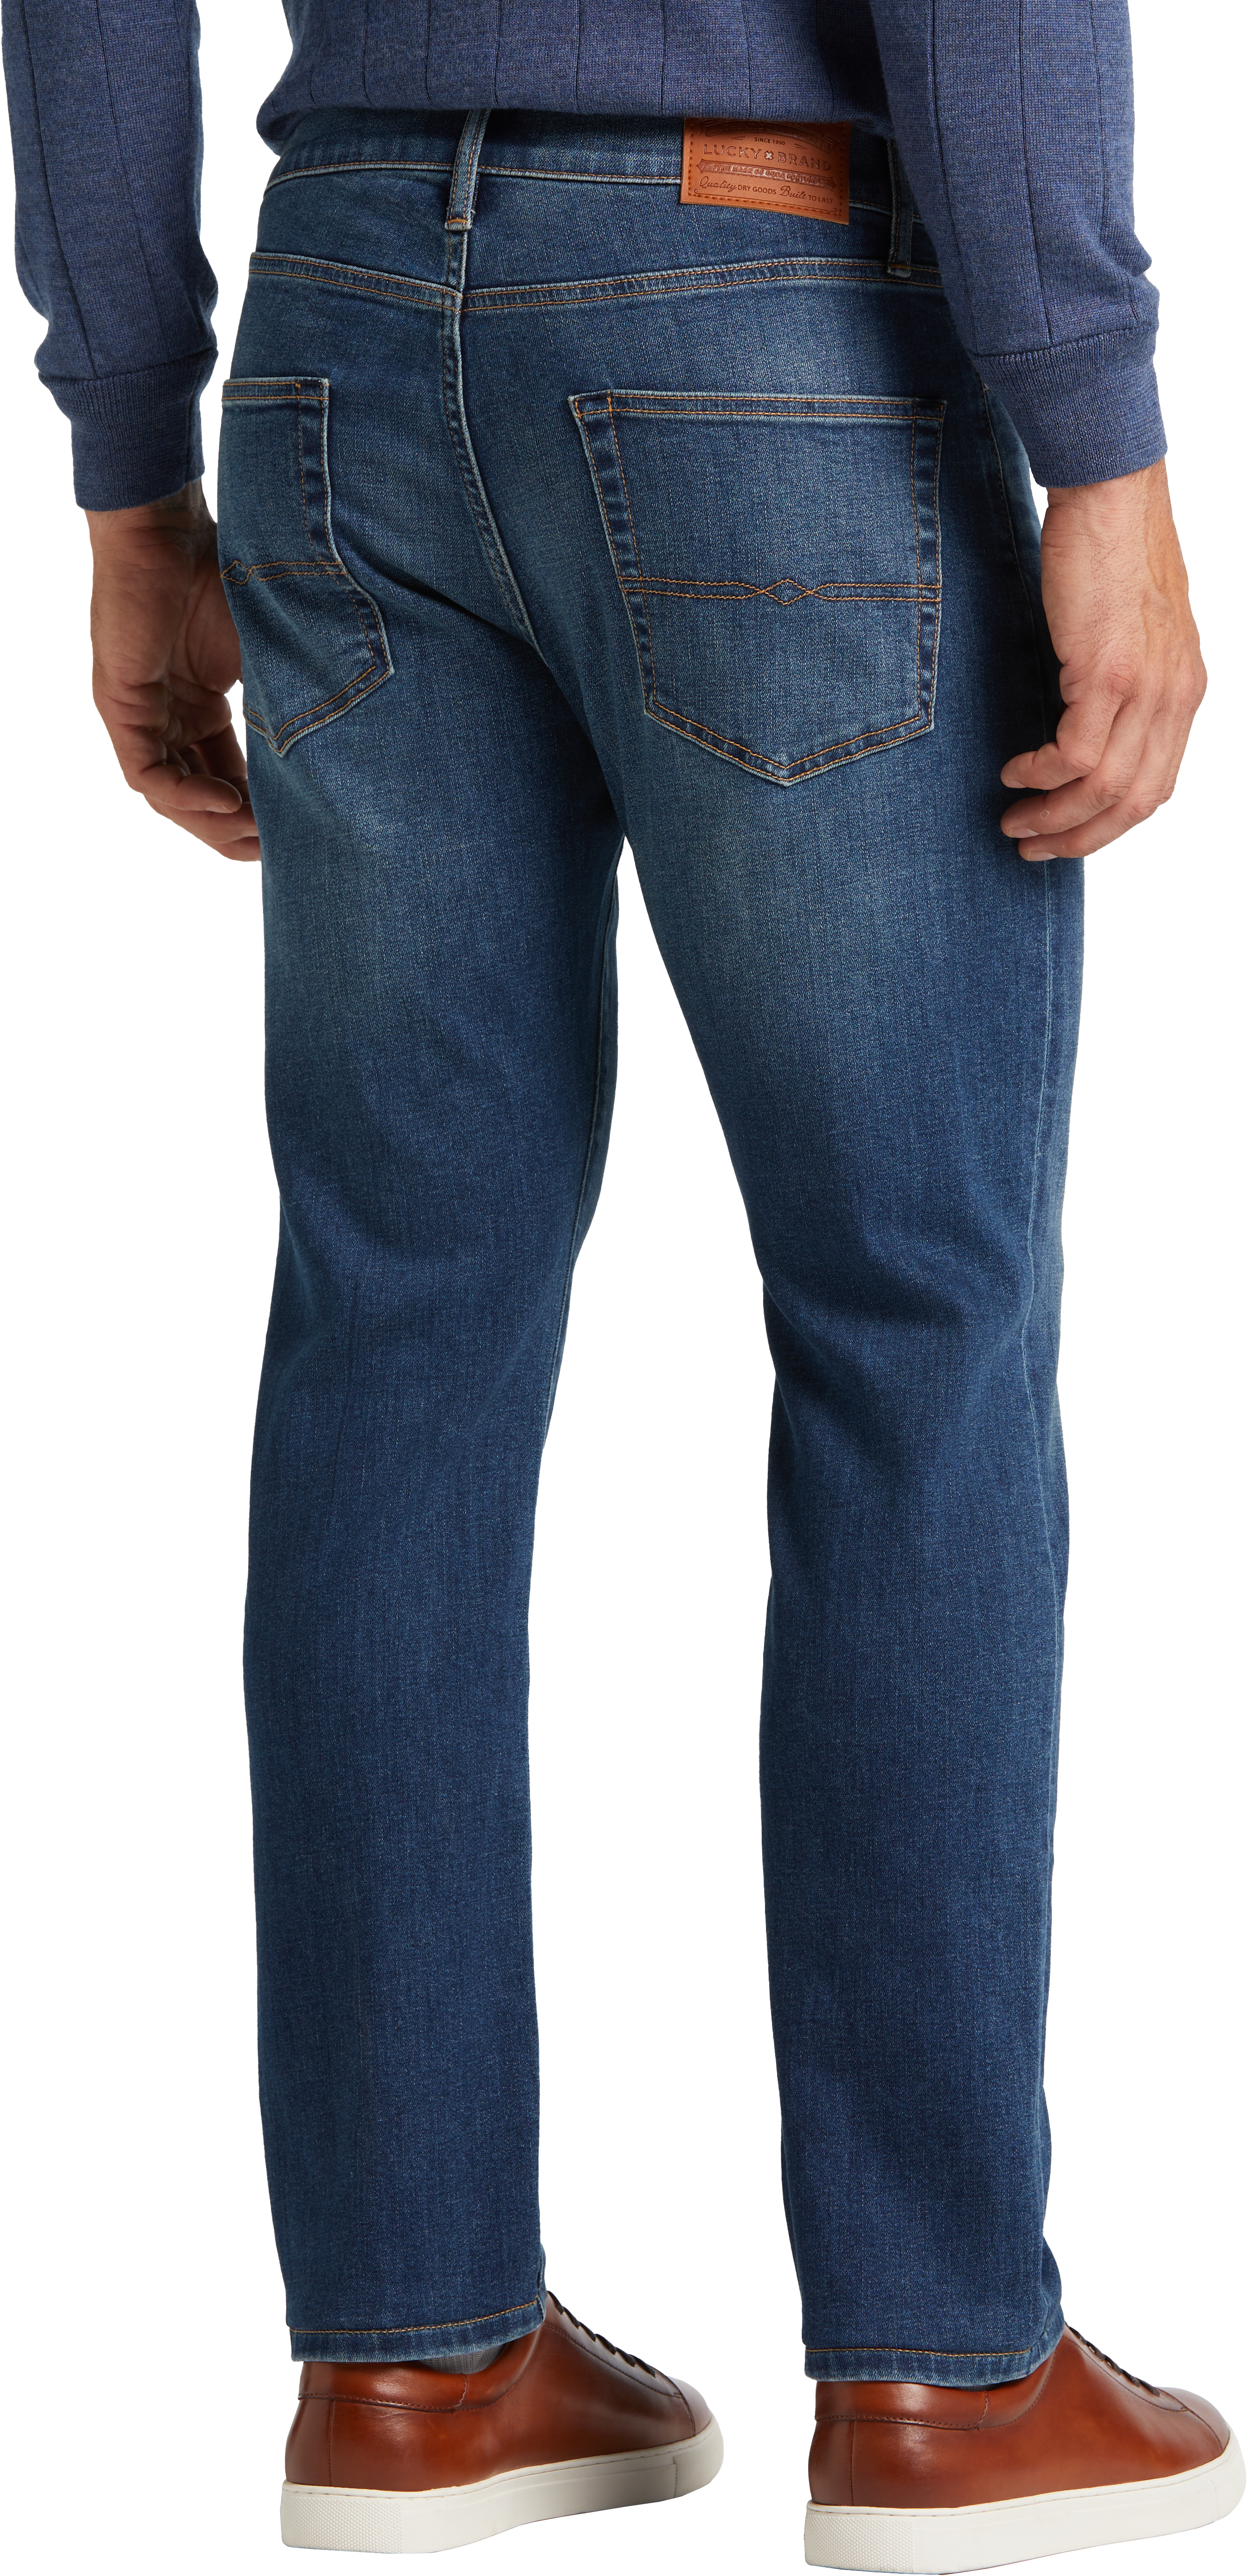 410 Suffolk Athletic Fit Jeans